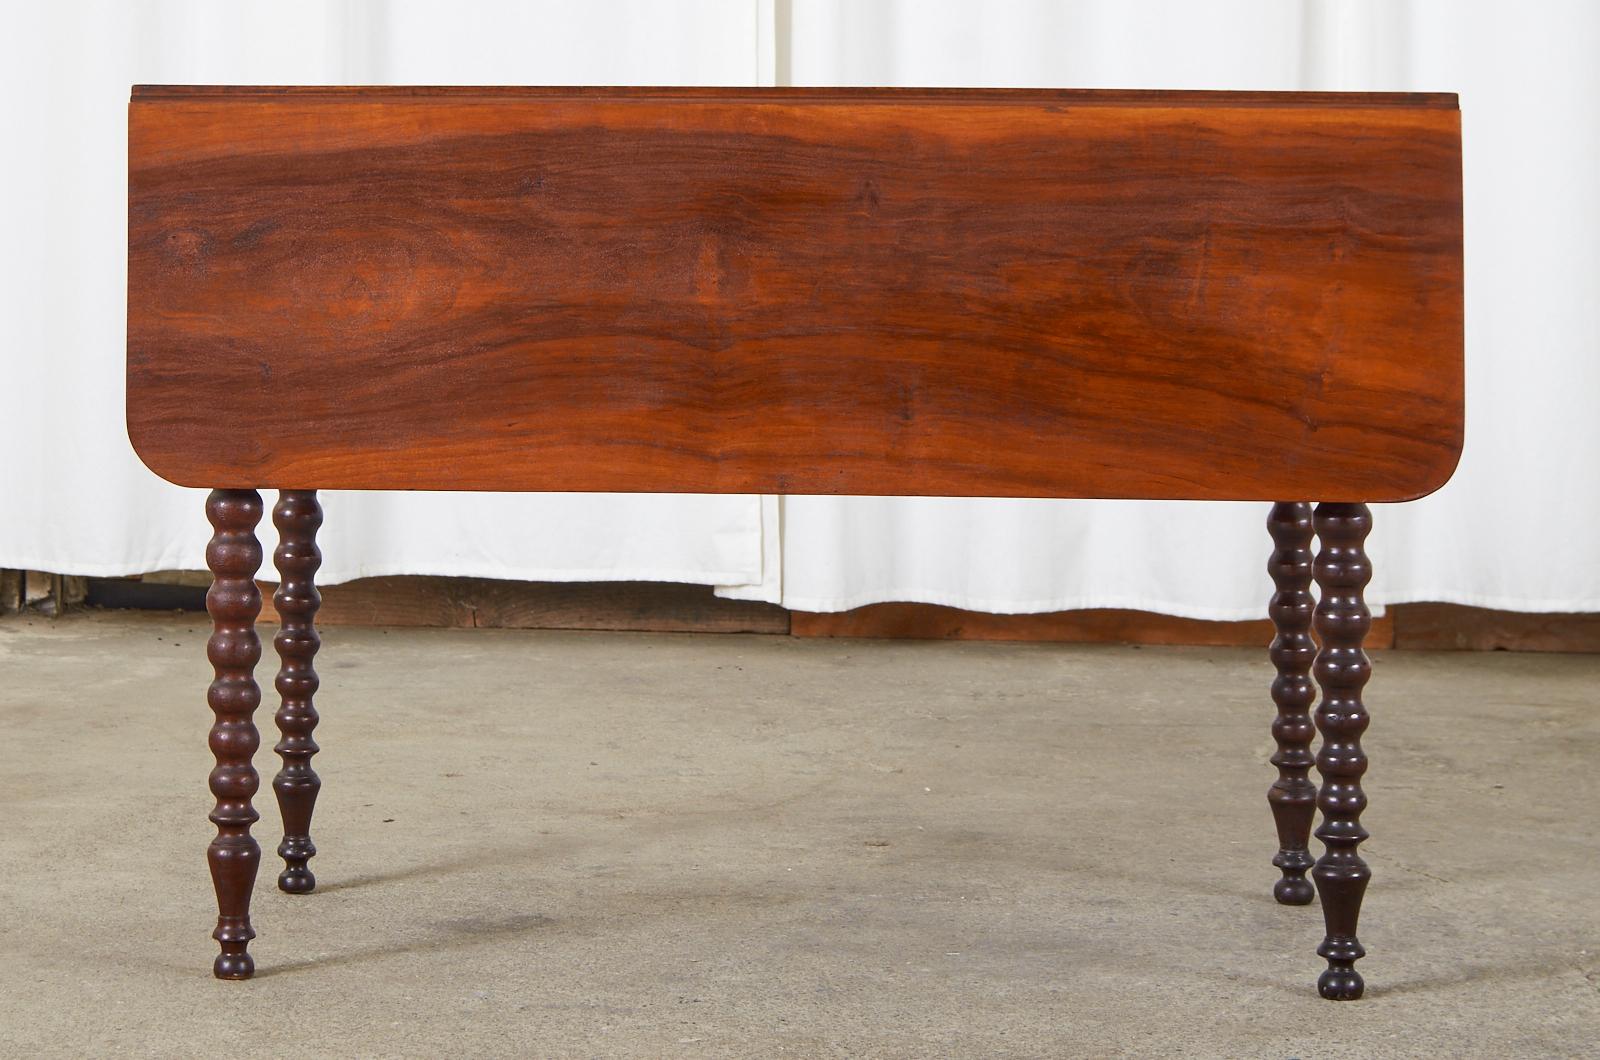 Handsome English 19th century mahogany drop-leaf dining table or Pembroke table. Made in the William IV taste featuring spindle legs or bobbin turned legs and ending with ball feet. The plank top measures 42 inches wide with the leaves open and 20